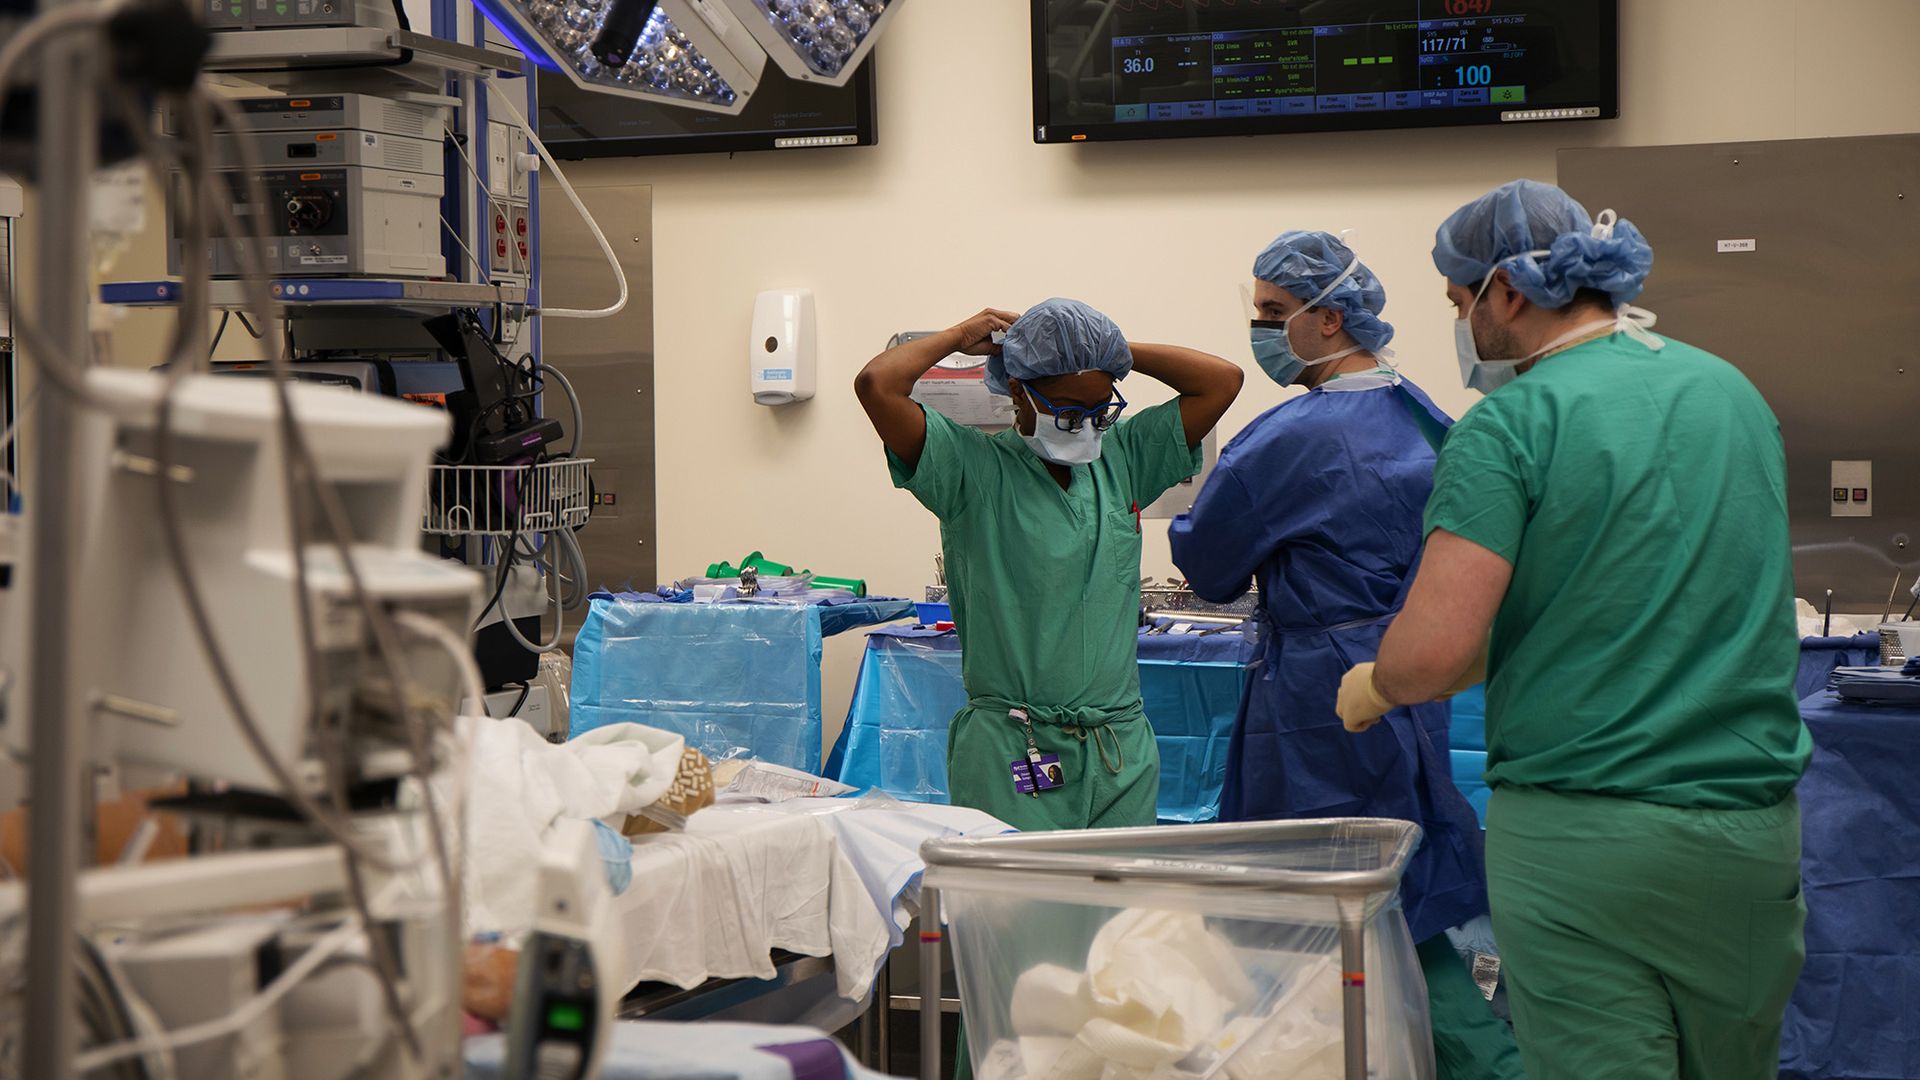 Photo of three doctors in scrubs standing around a patient's bed preparing for surgery